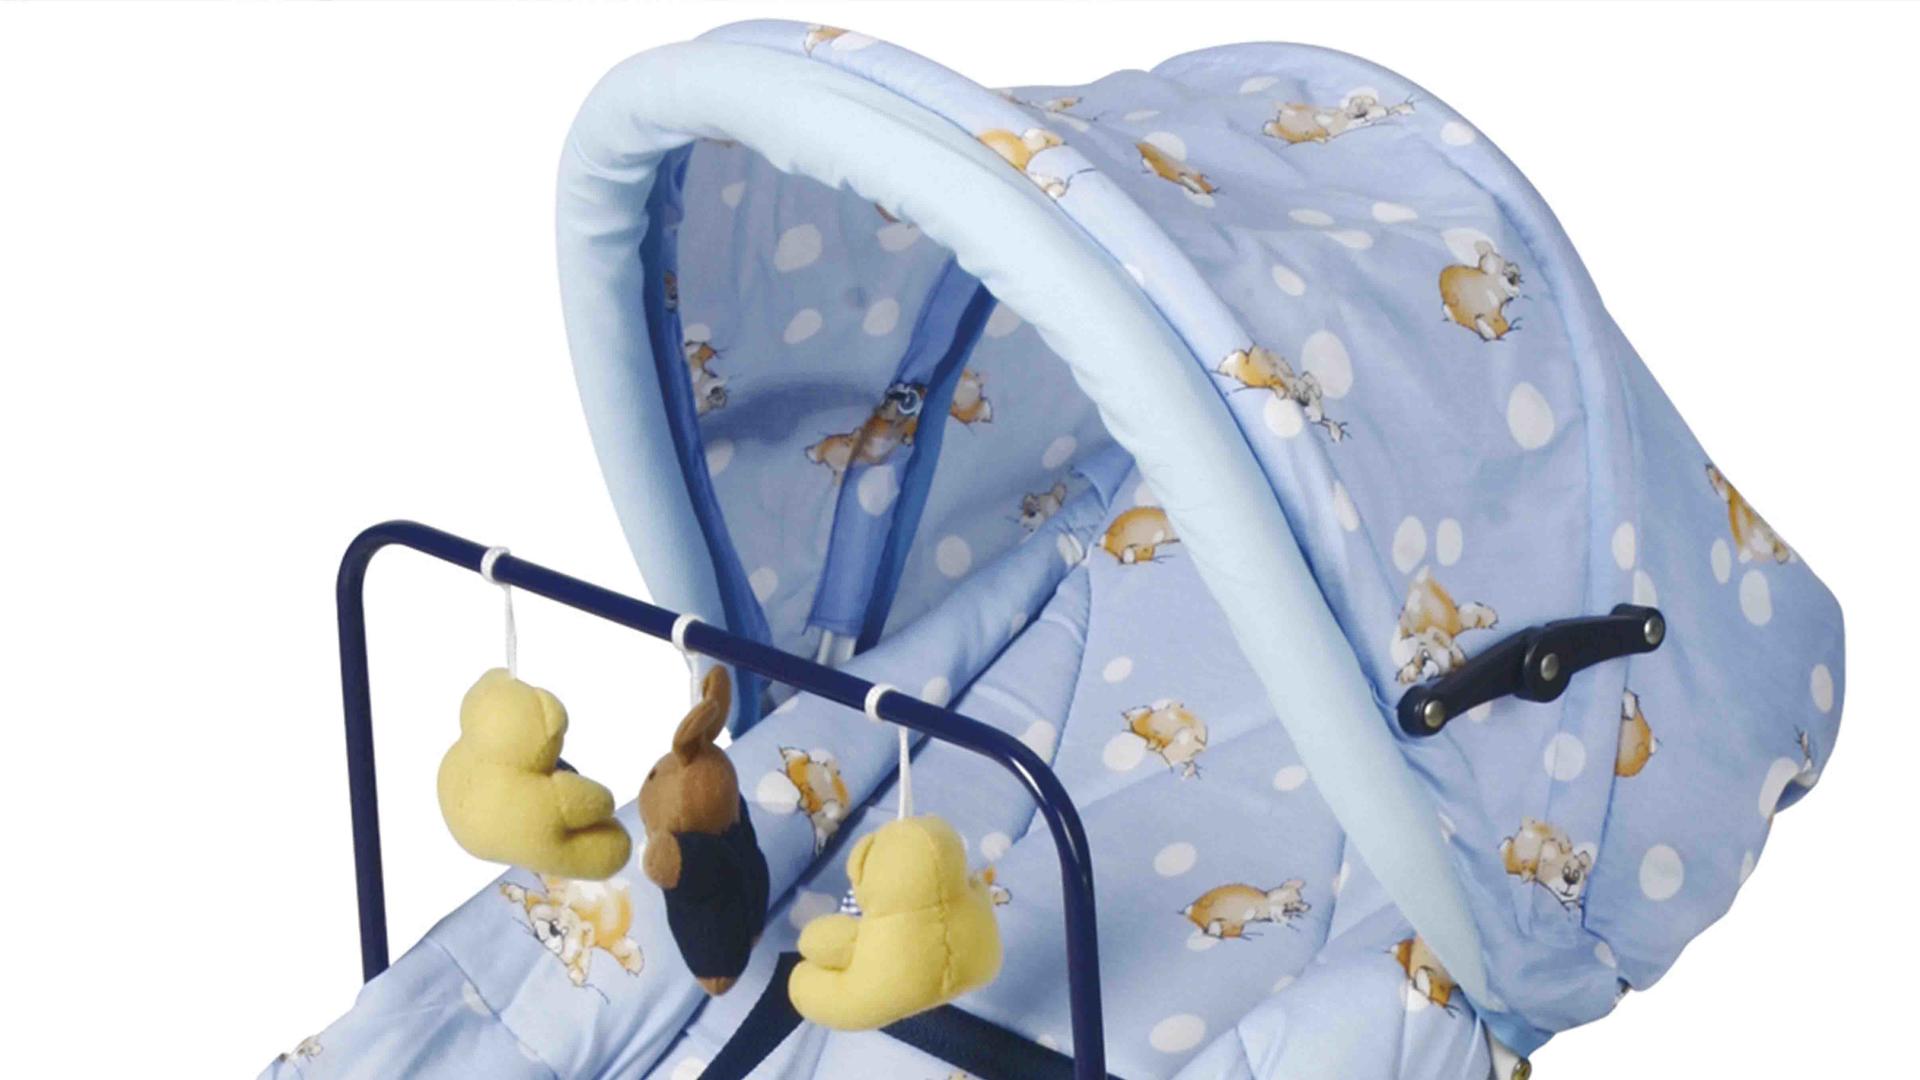 toddler hanging baby bouncer and rocker canopy Aoqi Brand